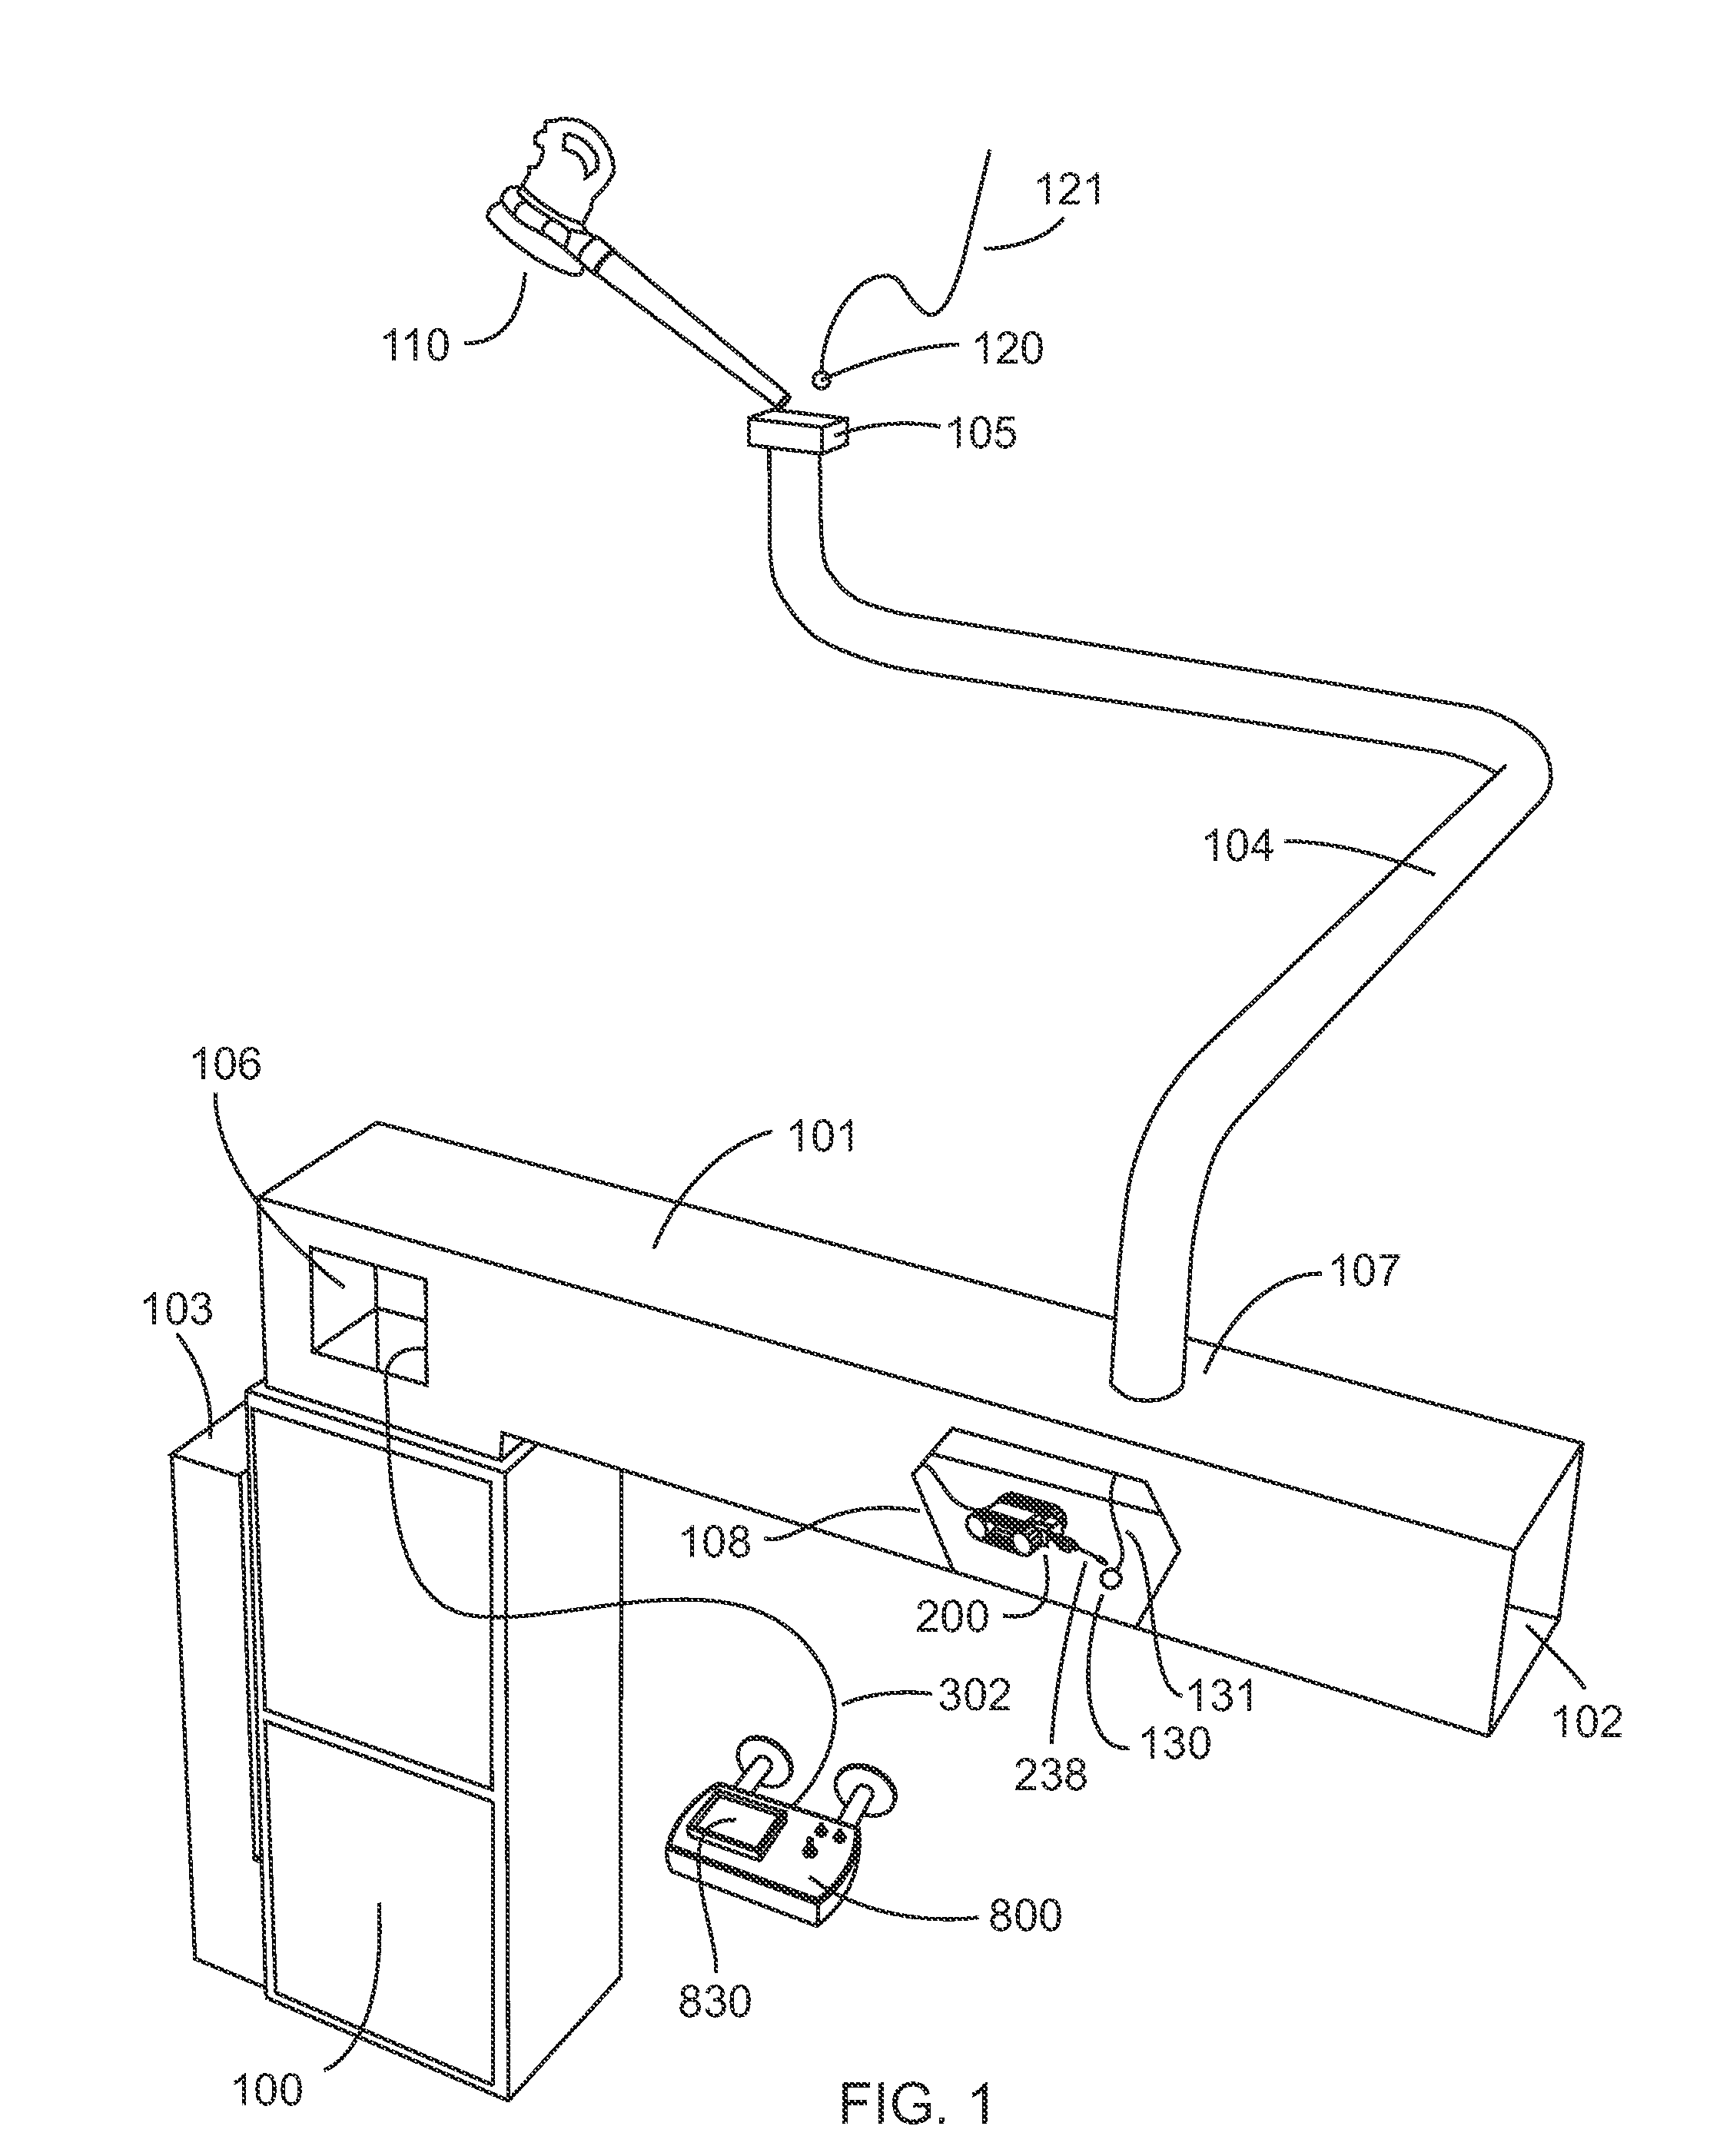 Remote controlled vehicle for threading a string through HVAC ducts